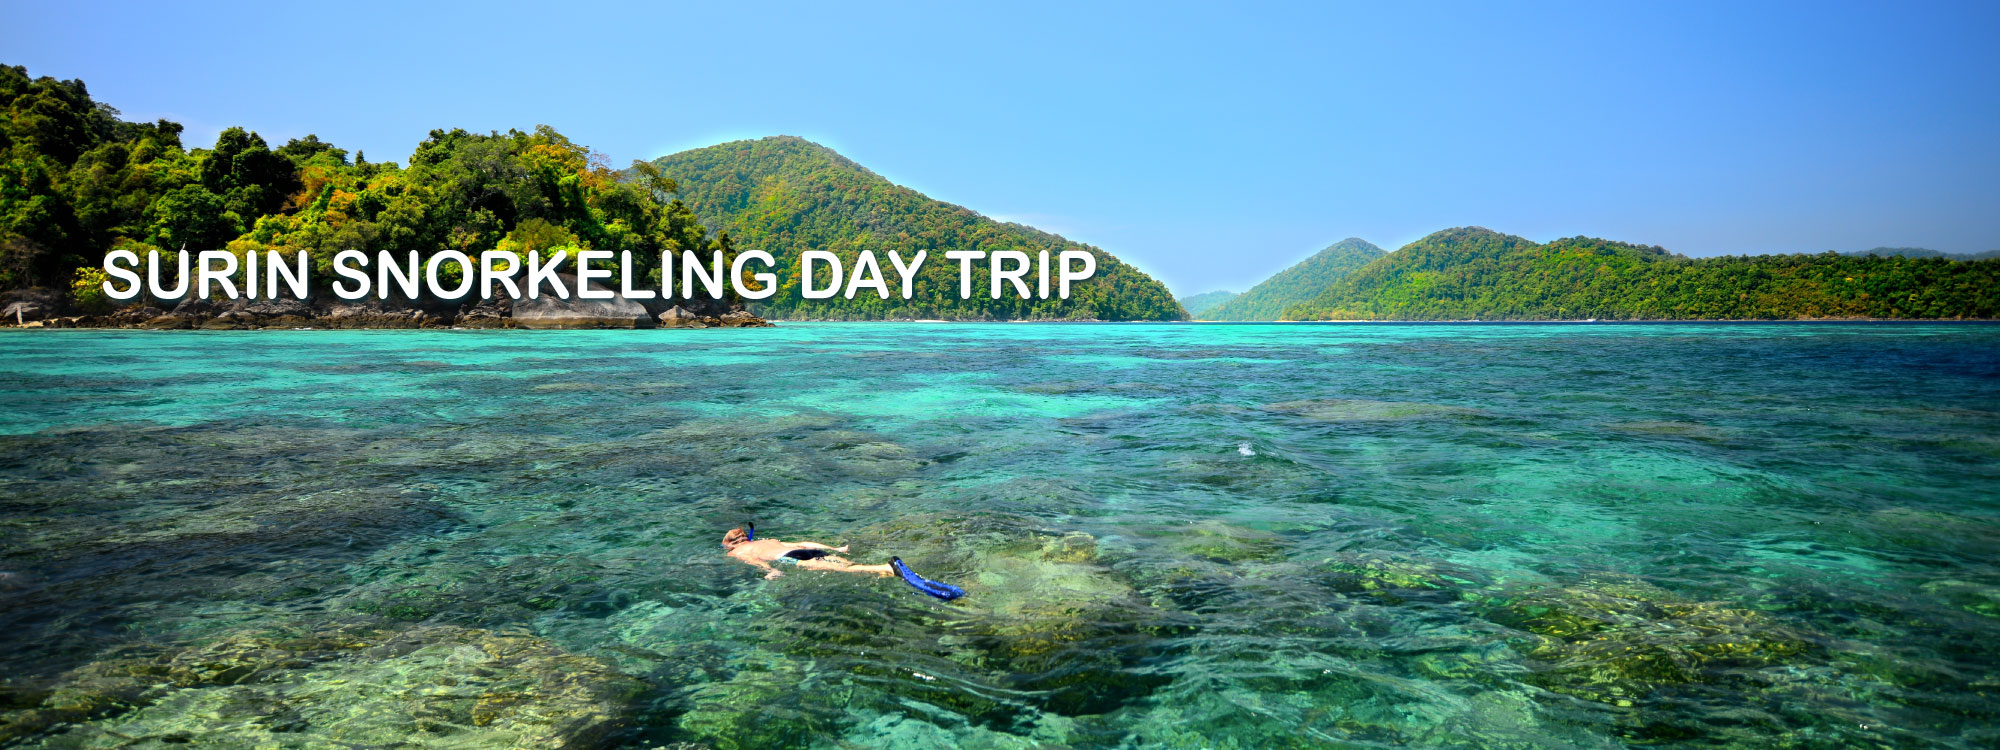 Surin Snorkeling Tour Packages